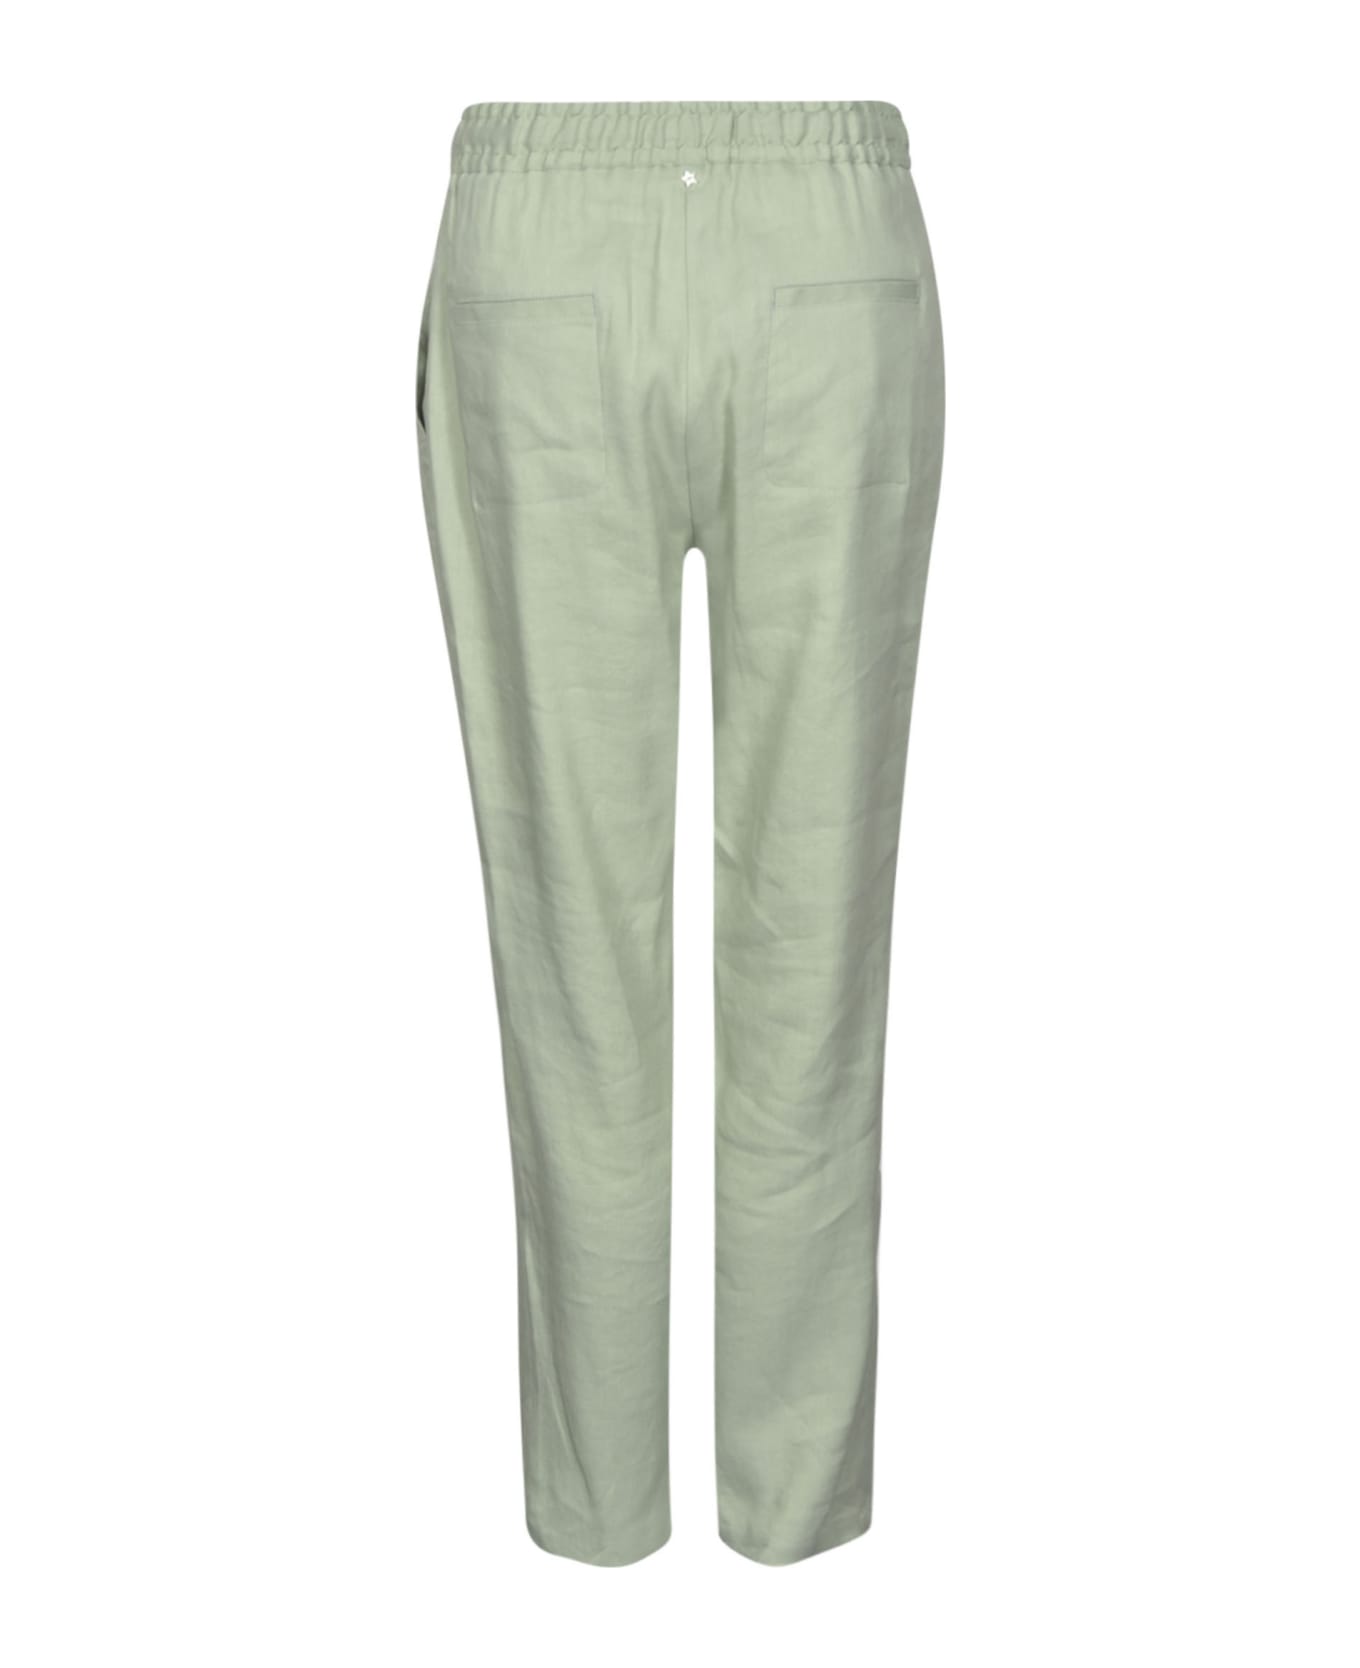 Lorena Antoniazzi Laced Ribbed Trousers - Green